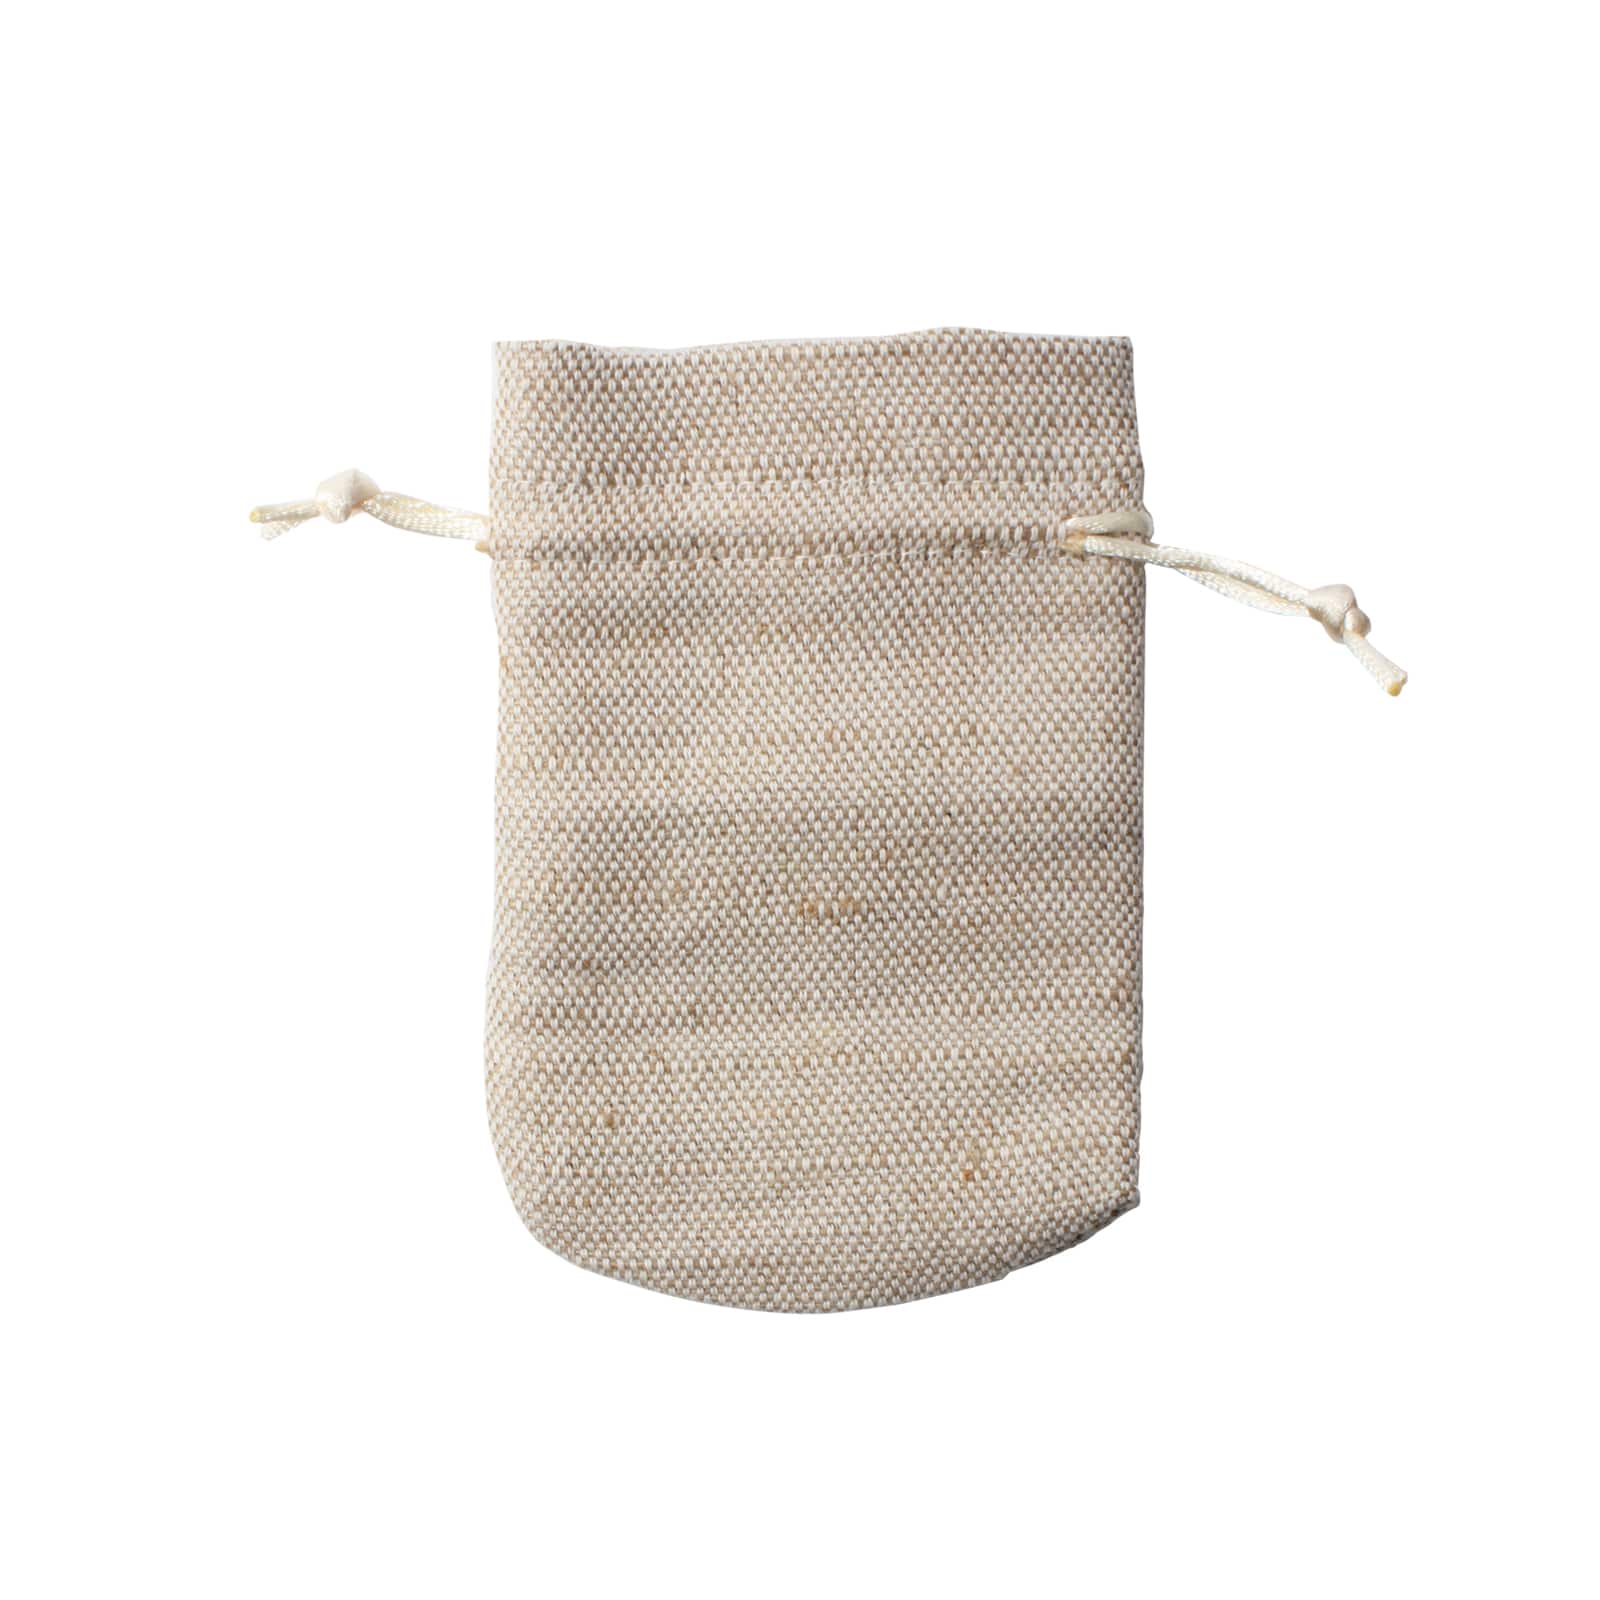 12 Packs: 8 ct. (96 total) 5.5 Linen Jewelry Bags by Bead Landing™